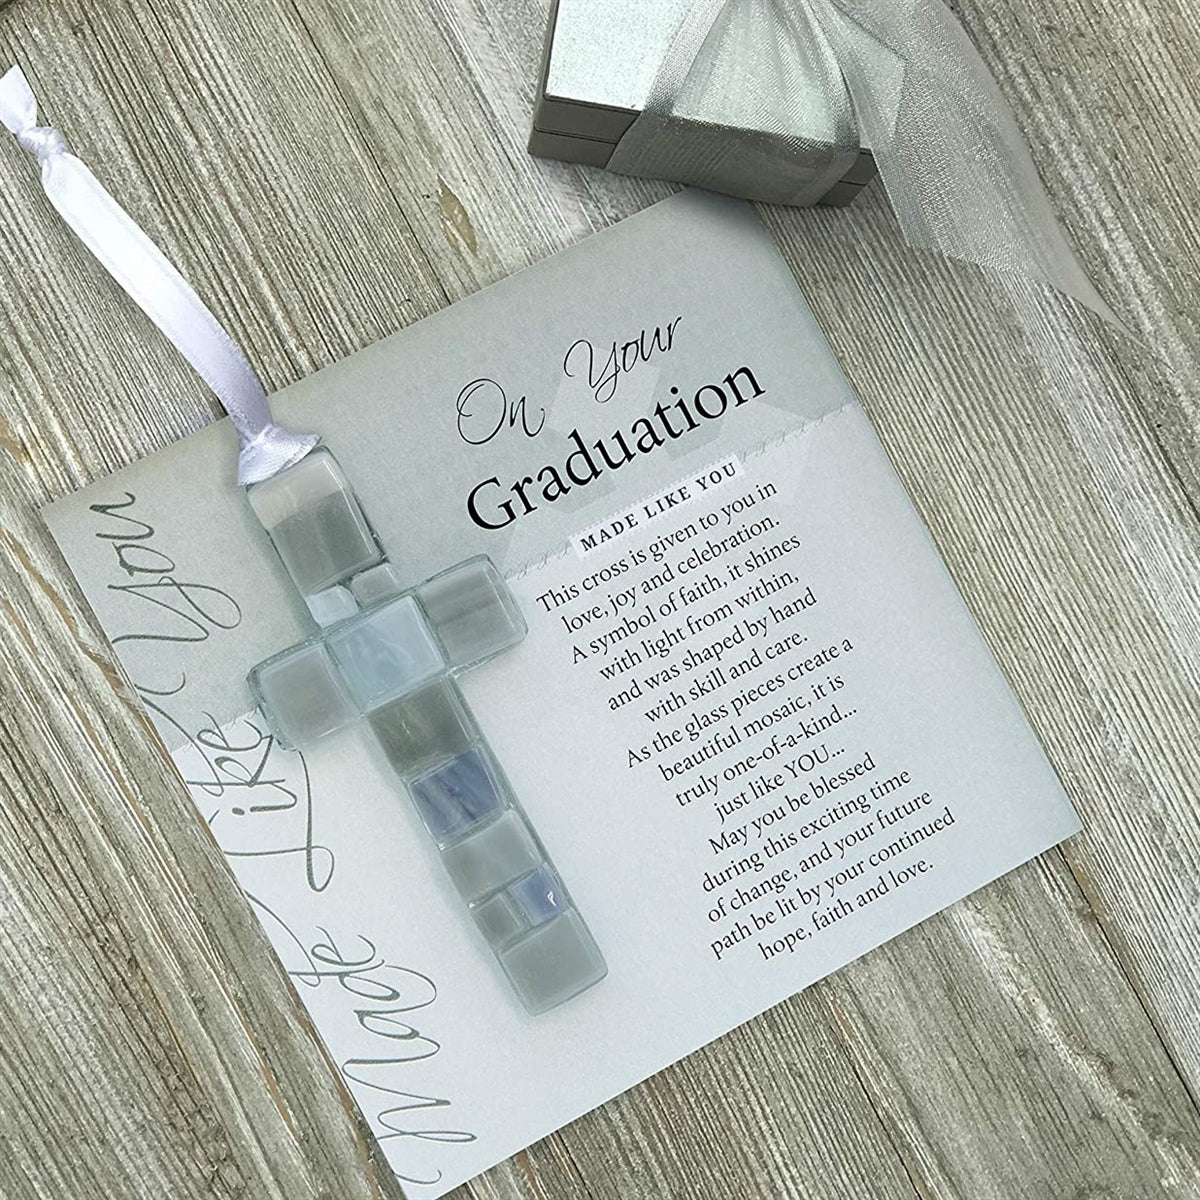 Gray mosaic cross with shades of gray, white, or blue lying on the &quot;On Your Graduation&quot; sentiment artwork.